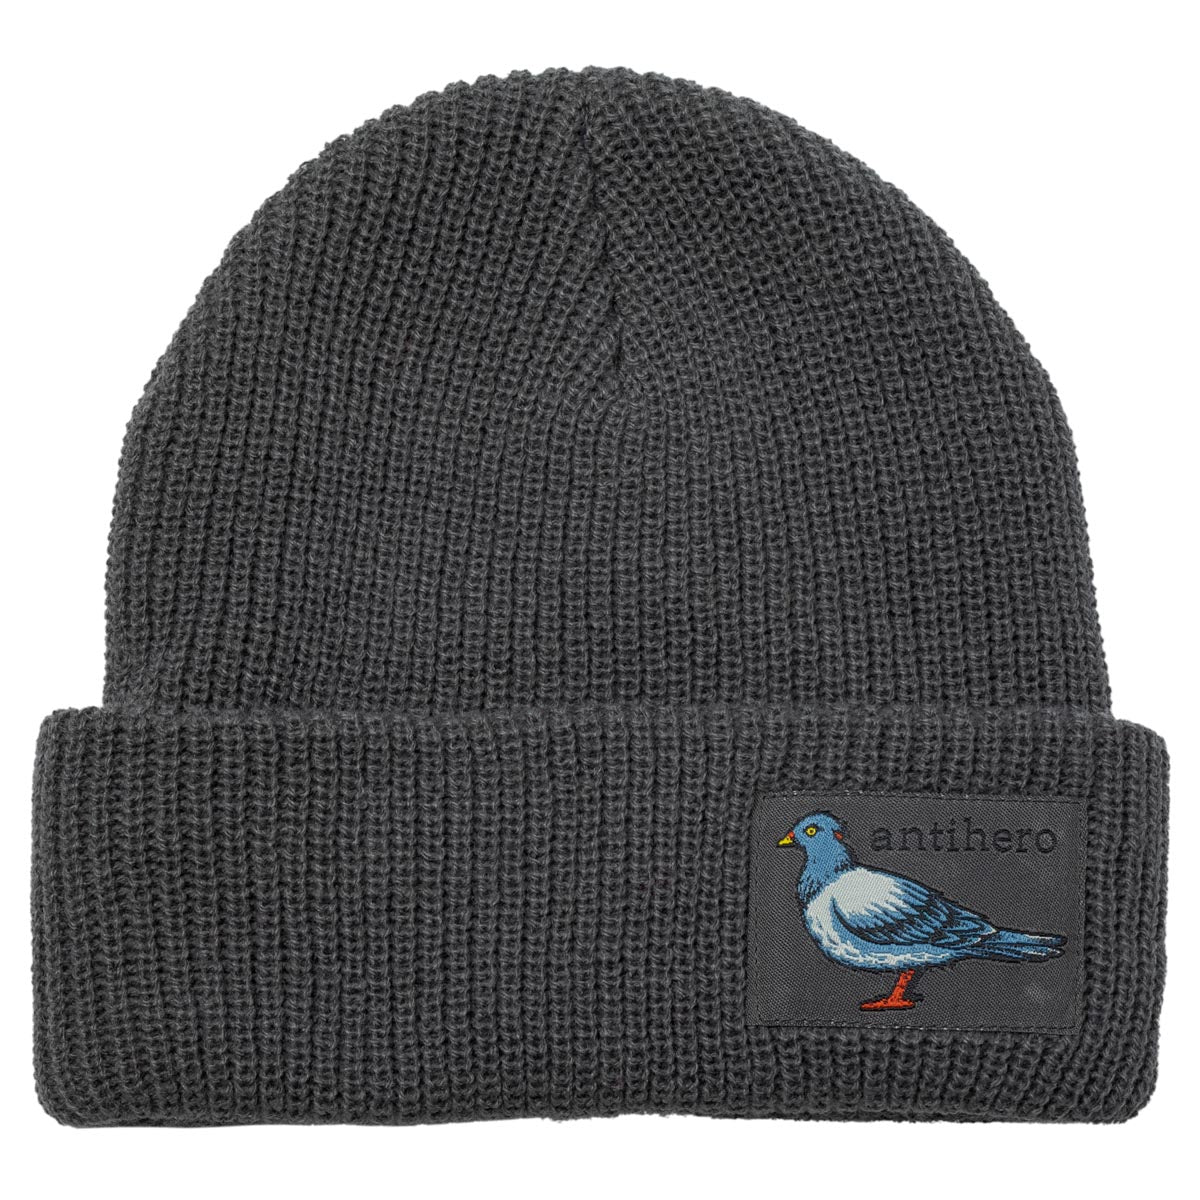 Anti-Hero Lil Pigeon Label Beanie - Charcoal/Charcoal image 1